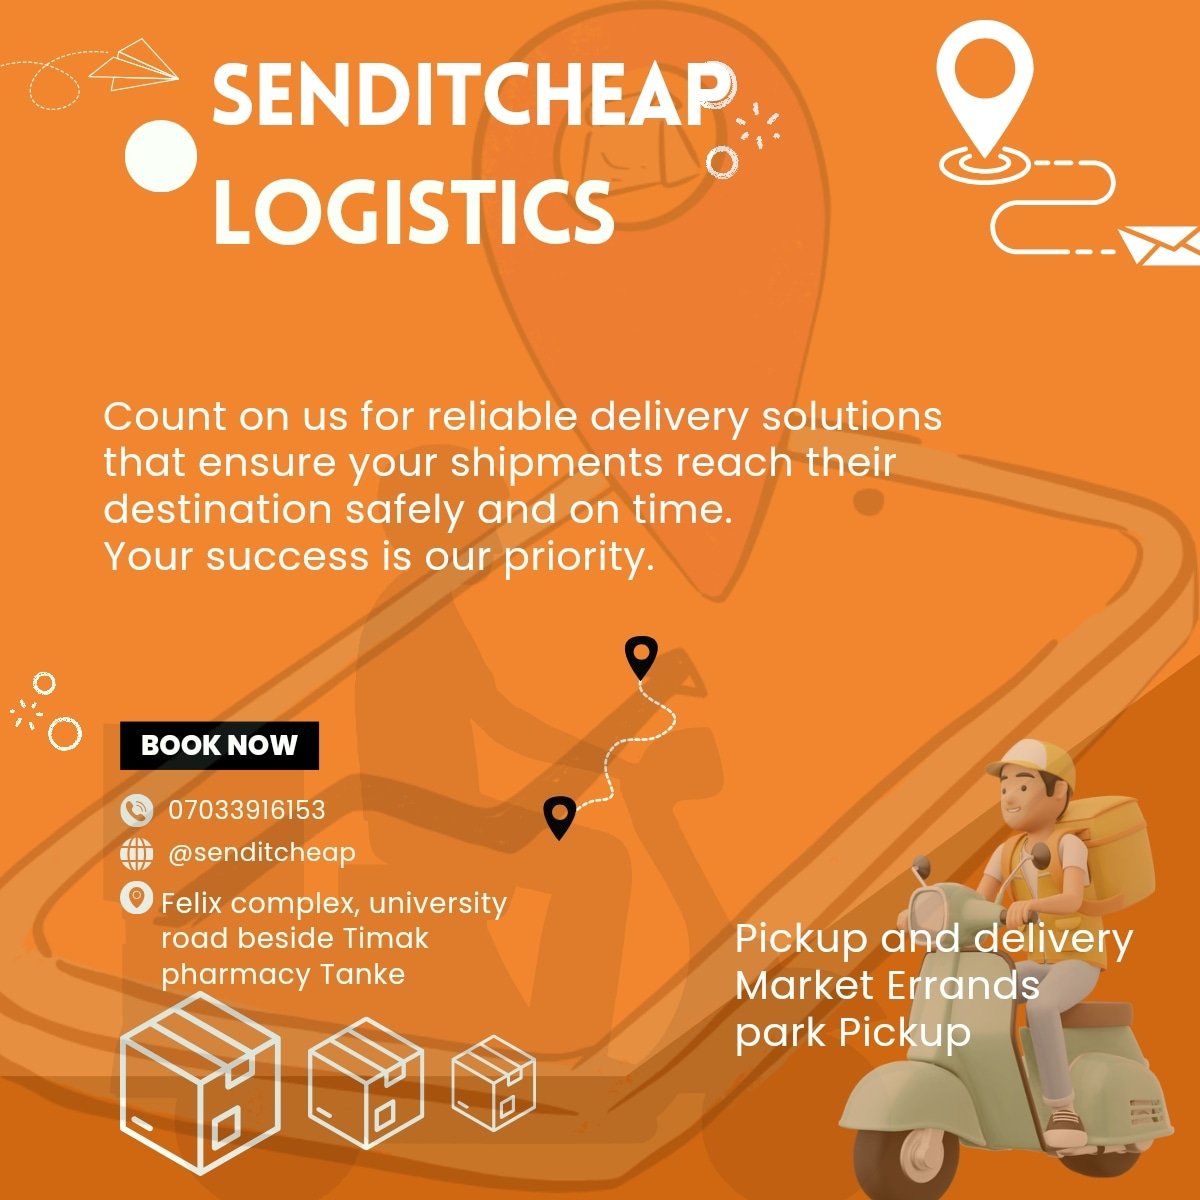 Count on us for reliable delivery solutions that ensure your packages reach their destination safely and on time💯
#logistics #logisticsmasters #pickupanddelivery